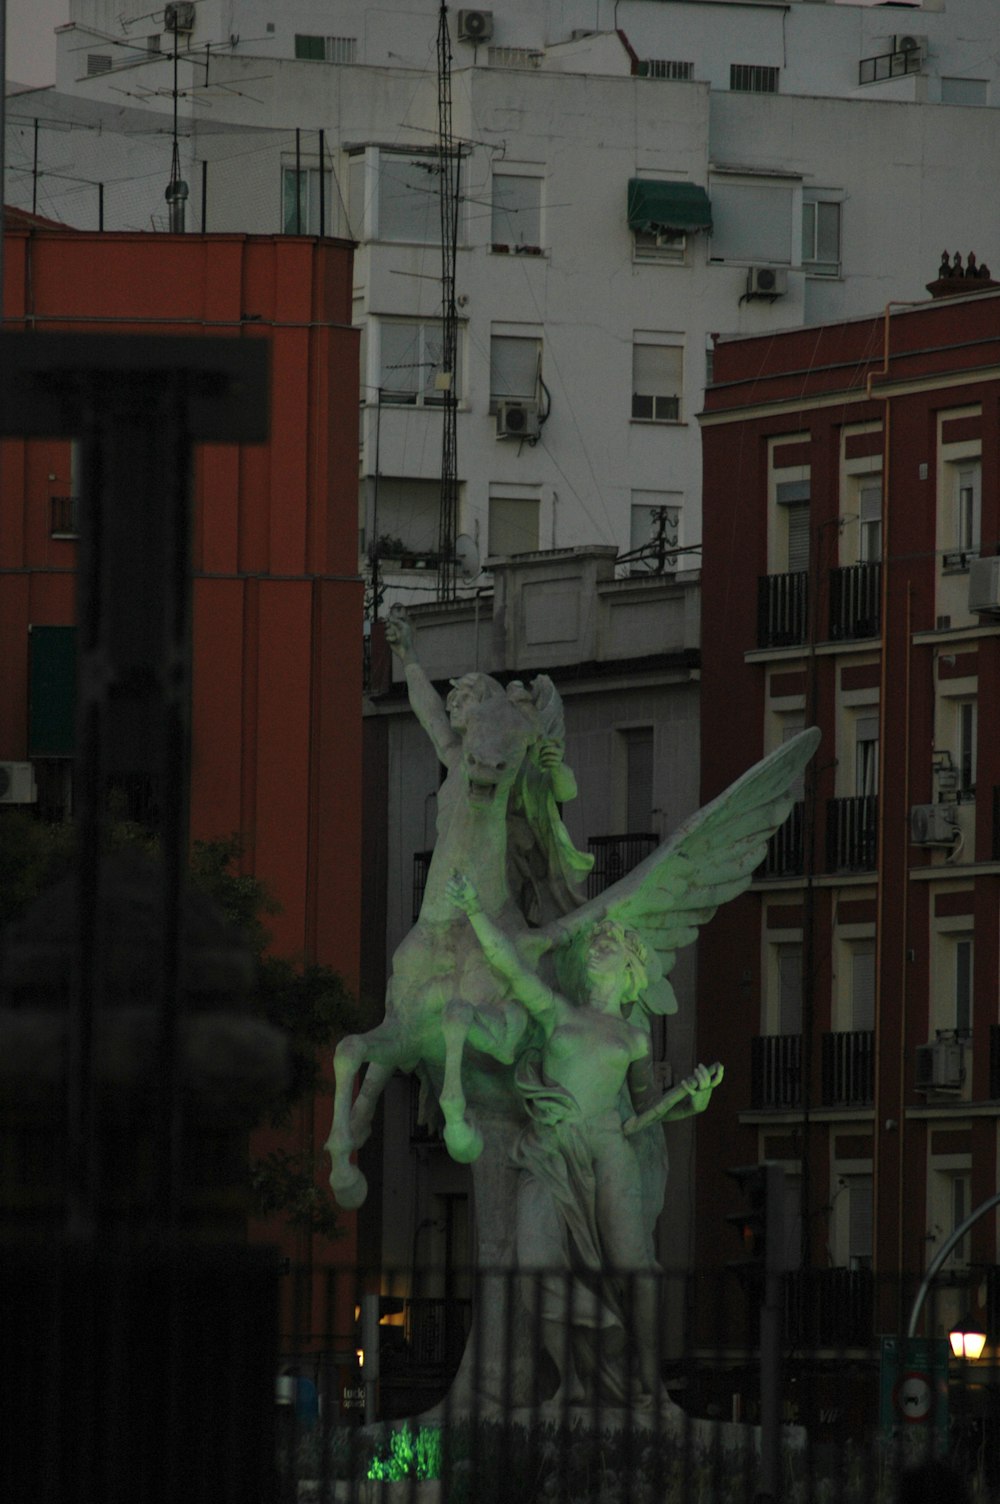 a statue of a woman riding a horse in a city